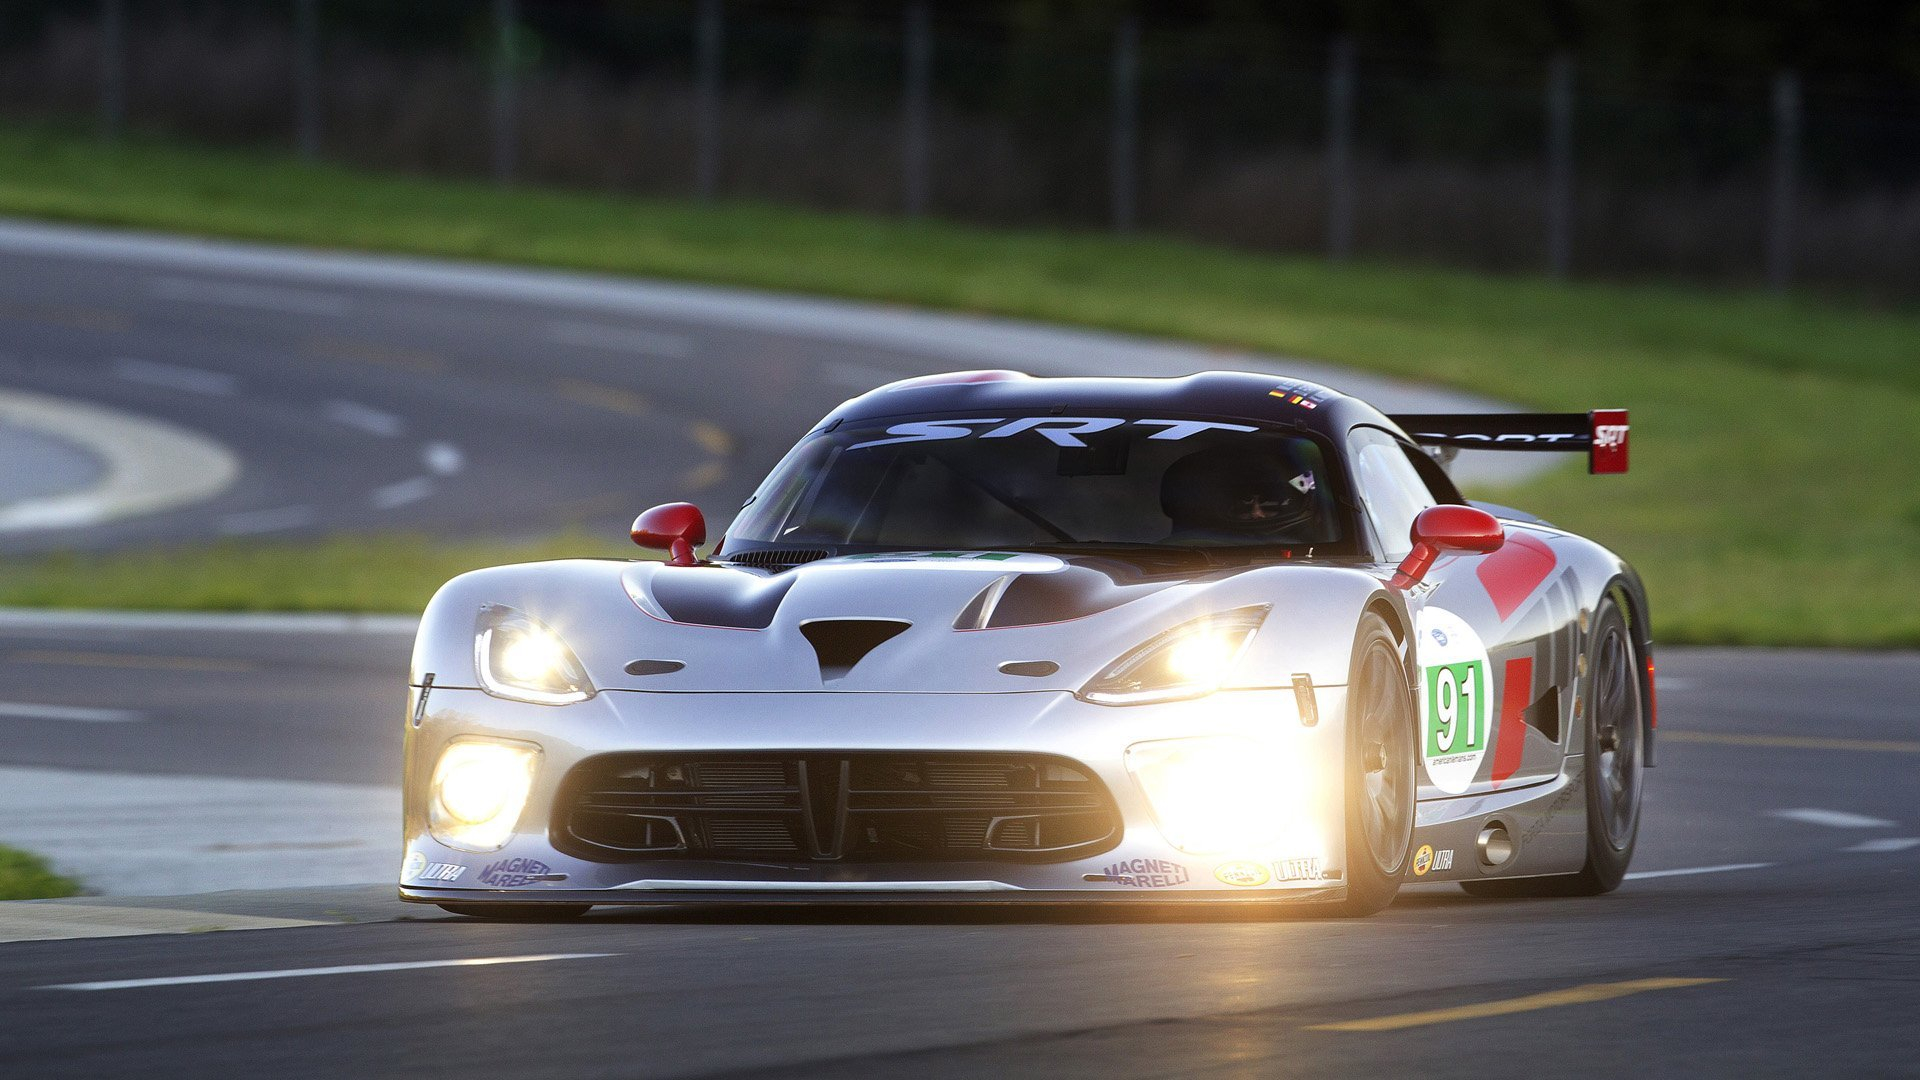 1920x1080 This SRT Viper GTS-R Pic Wants To Be Your New Desktop Wallpaper